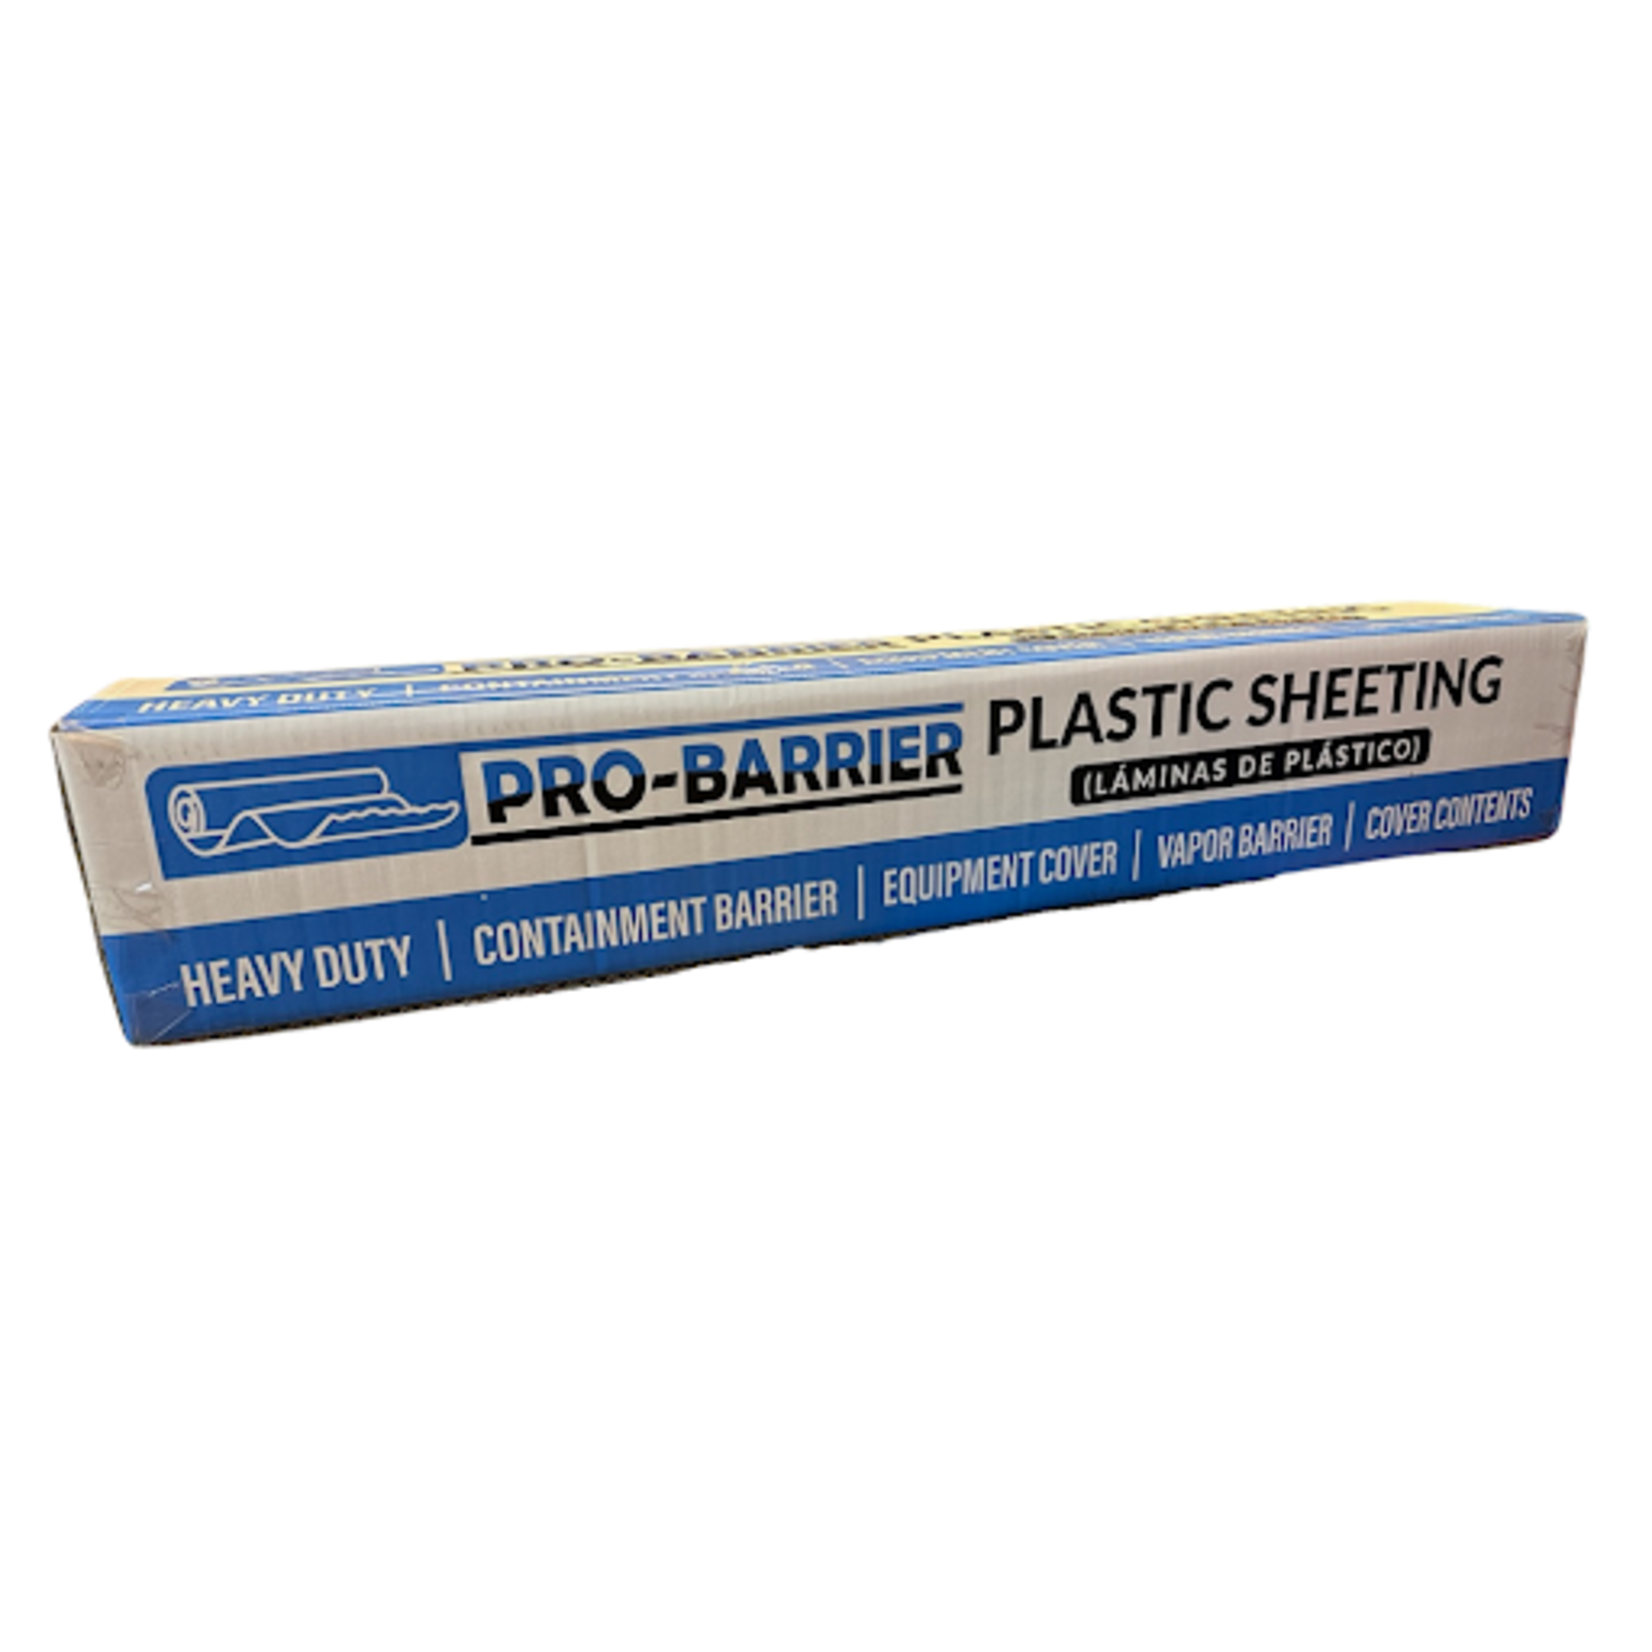 Pro-Barrier Pro-Barrier Plastic Sheeting 4 MIL 10'x100' Clear